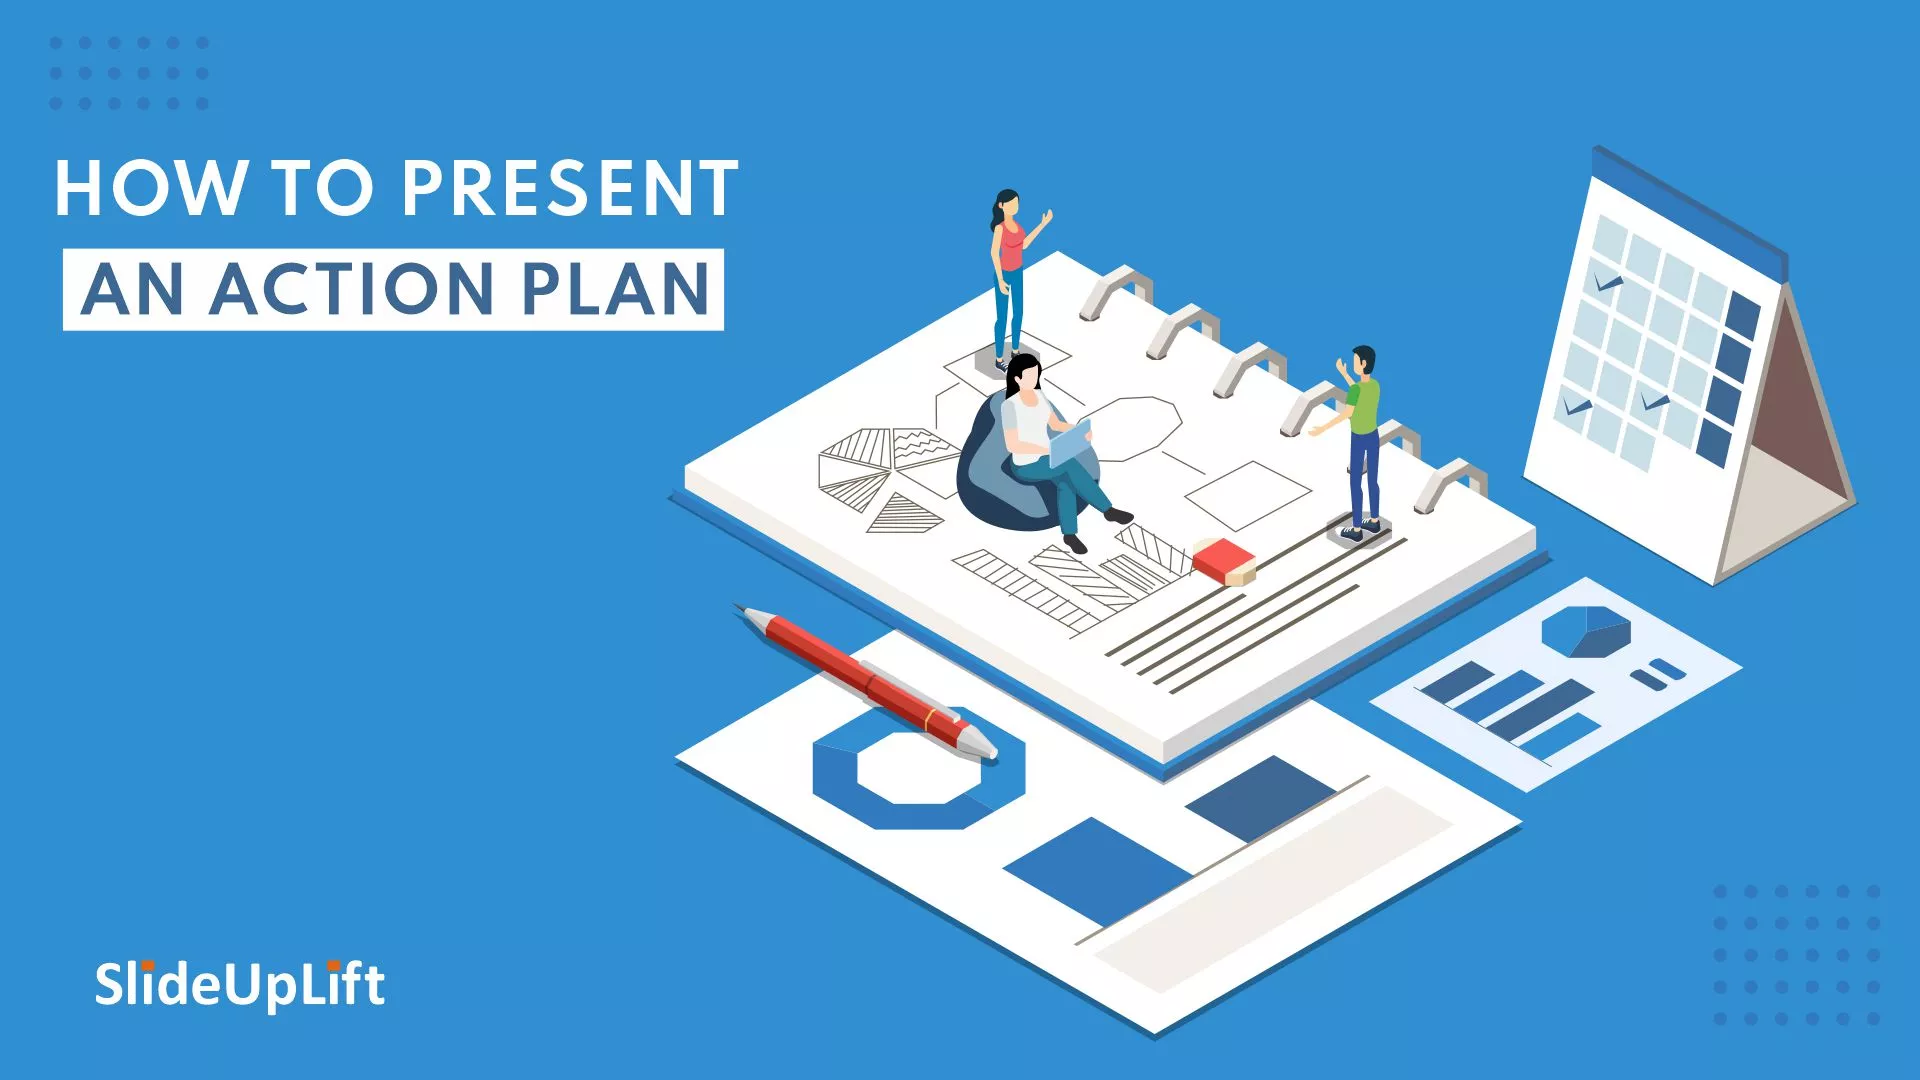 How To Present An Action Plan?